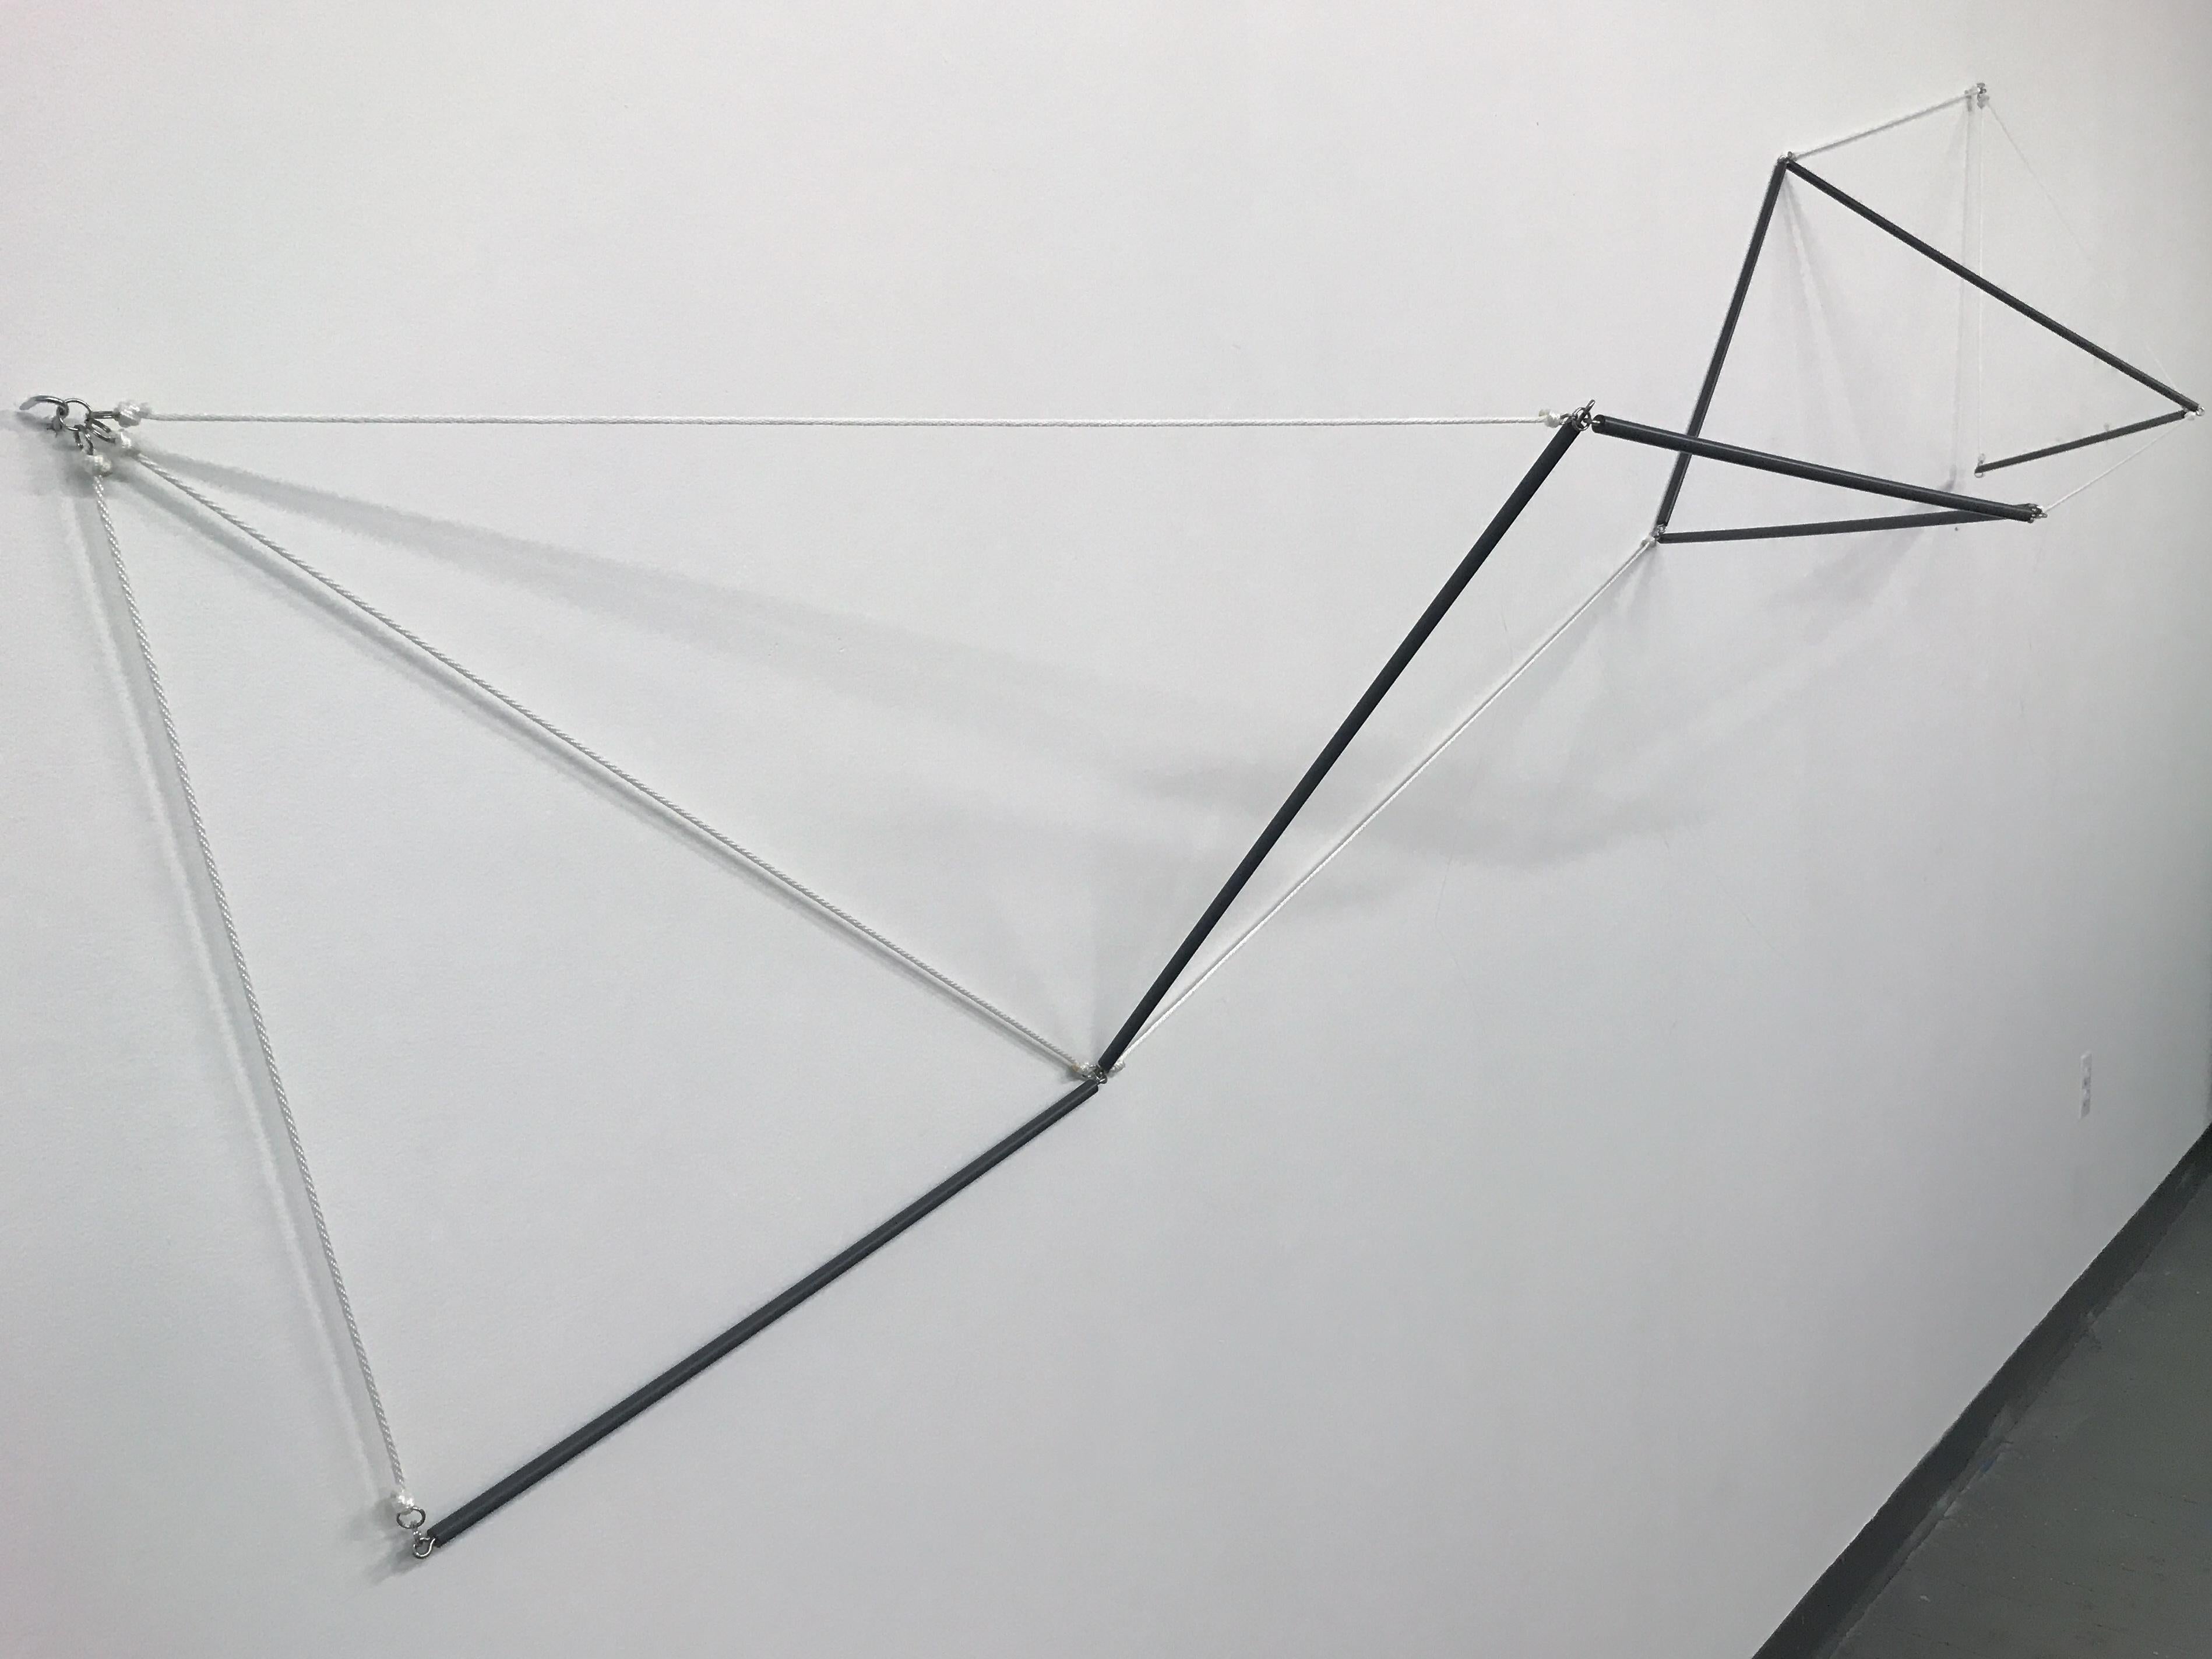 Flipside, 2018, polyester cord, PVC rod, stainless steel, 96 x 42.5 x 17.5 in - Sculpture by Daniel G. Hill